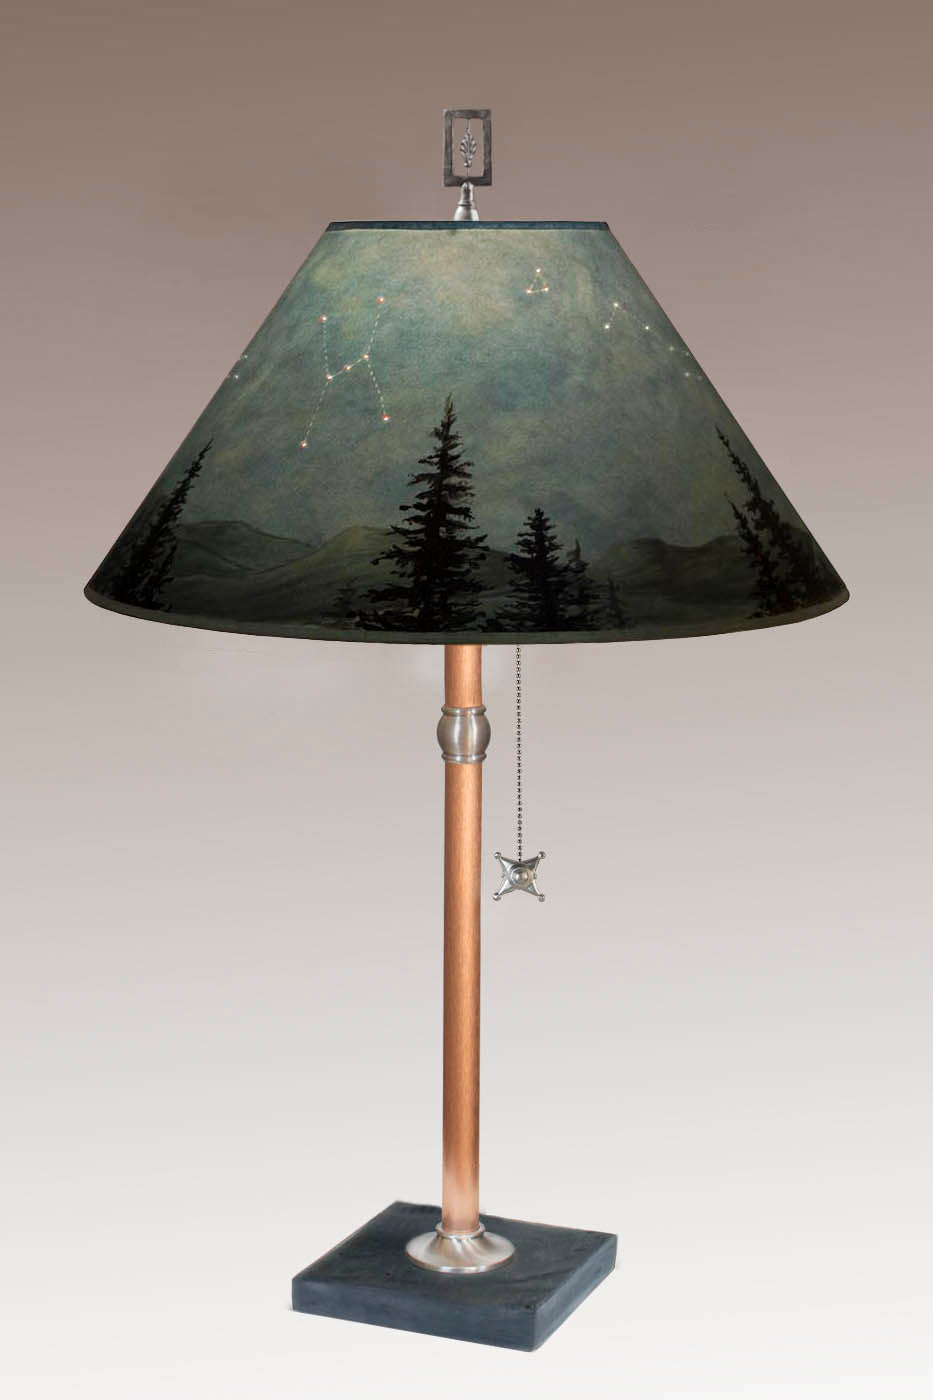 Janna Ugone & Co Table Lamp Copper Table Lamp with Large Conical Shade in Midnight Sky